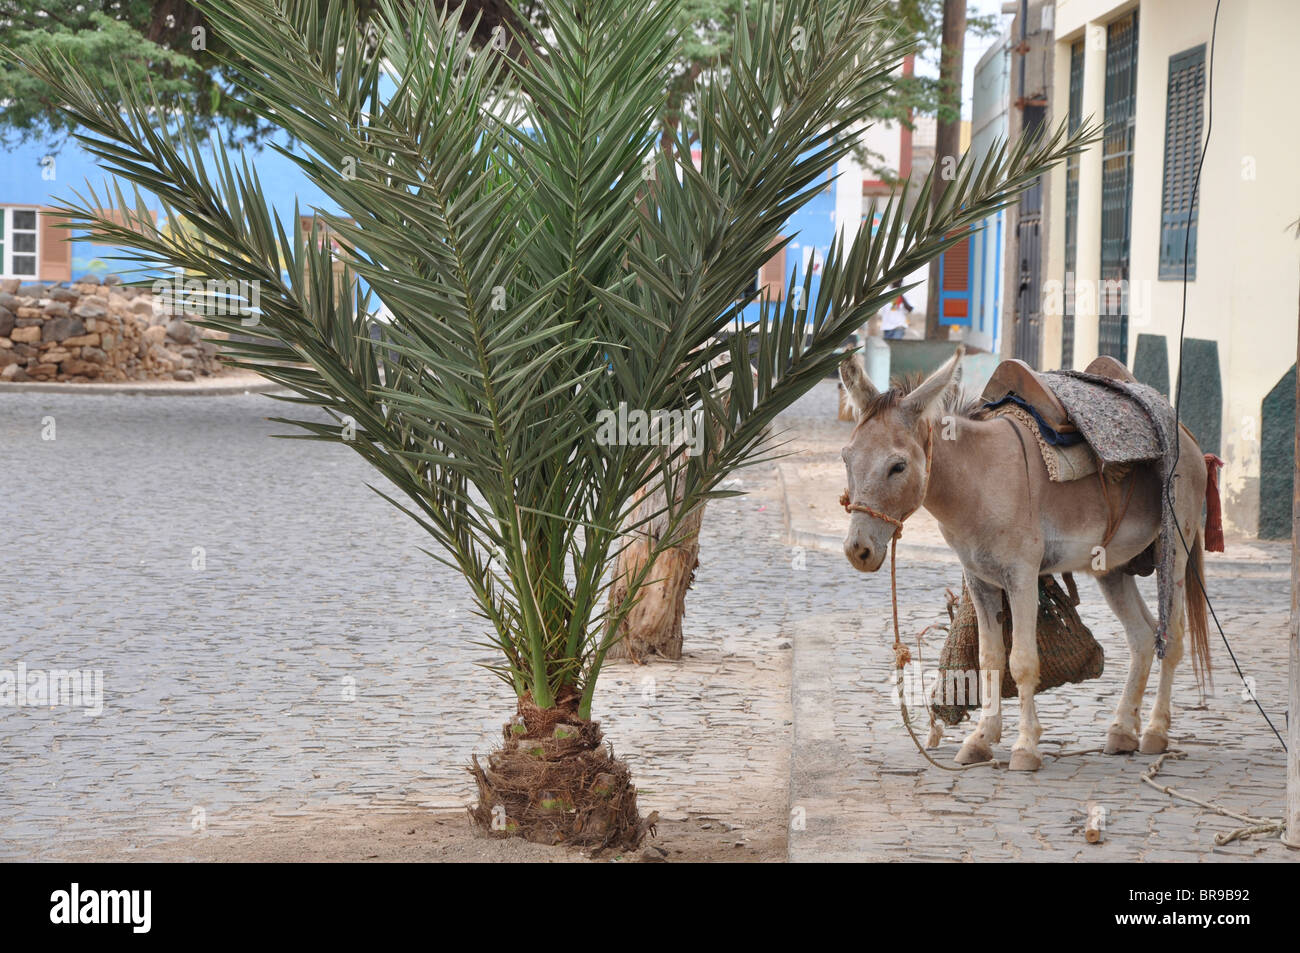 Donkey on cobbles on street in Sal, Cape Verde Stock Photo